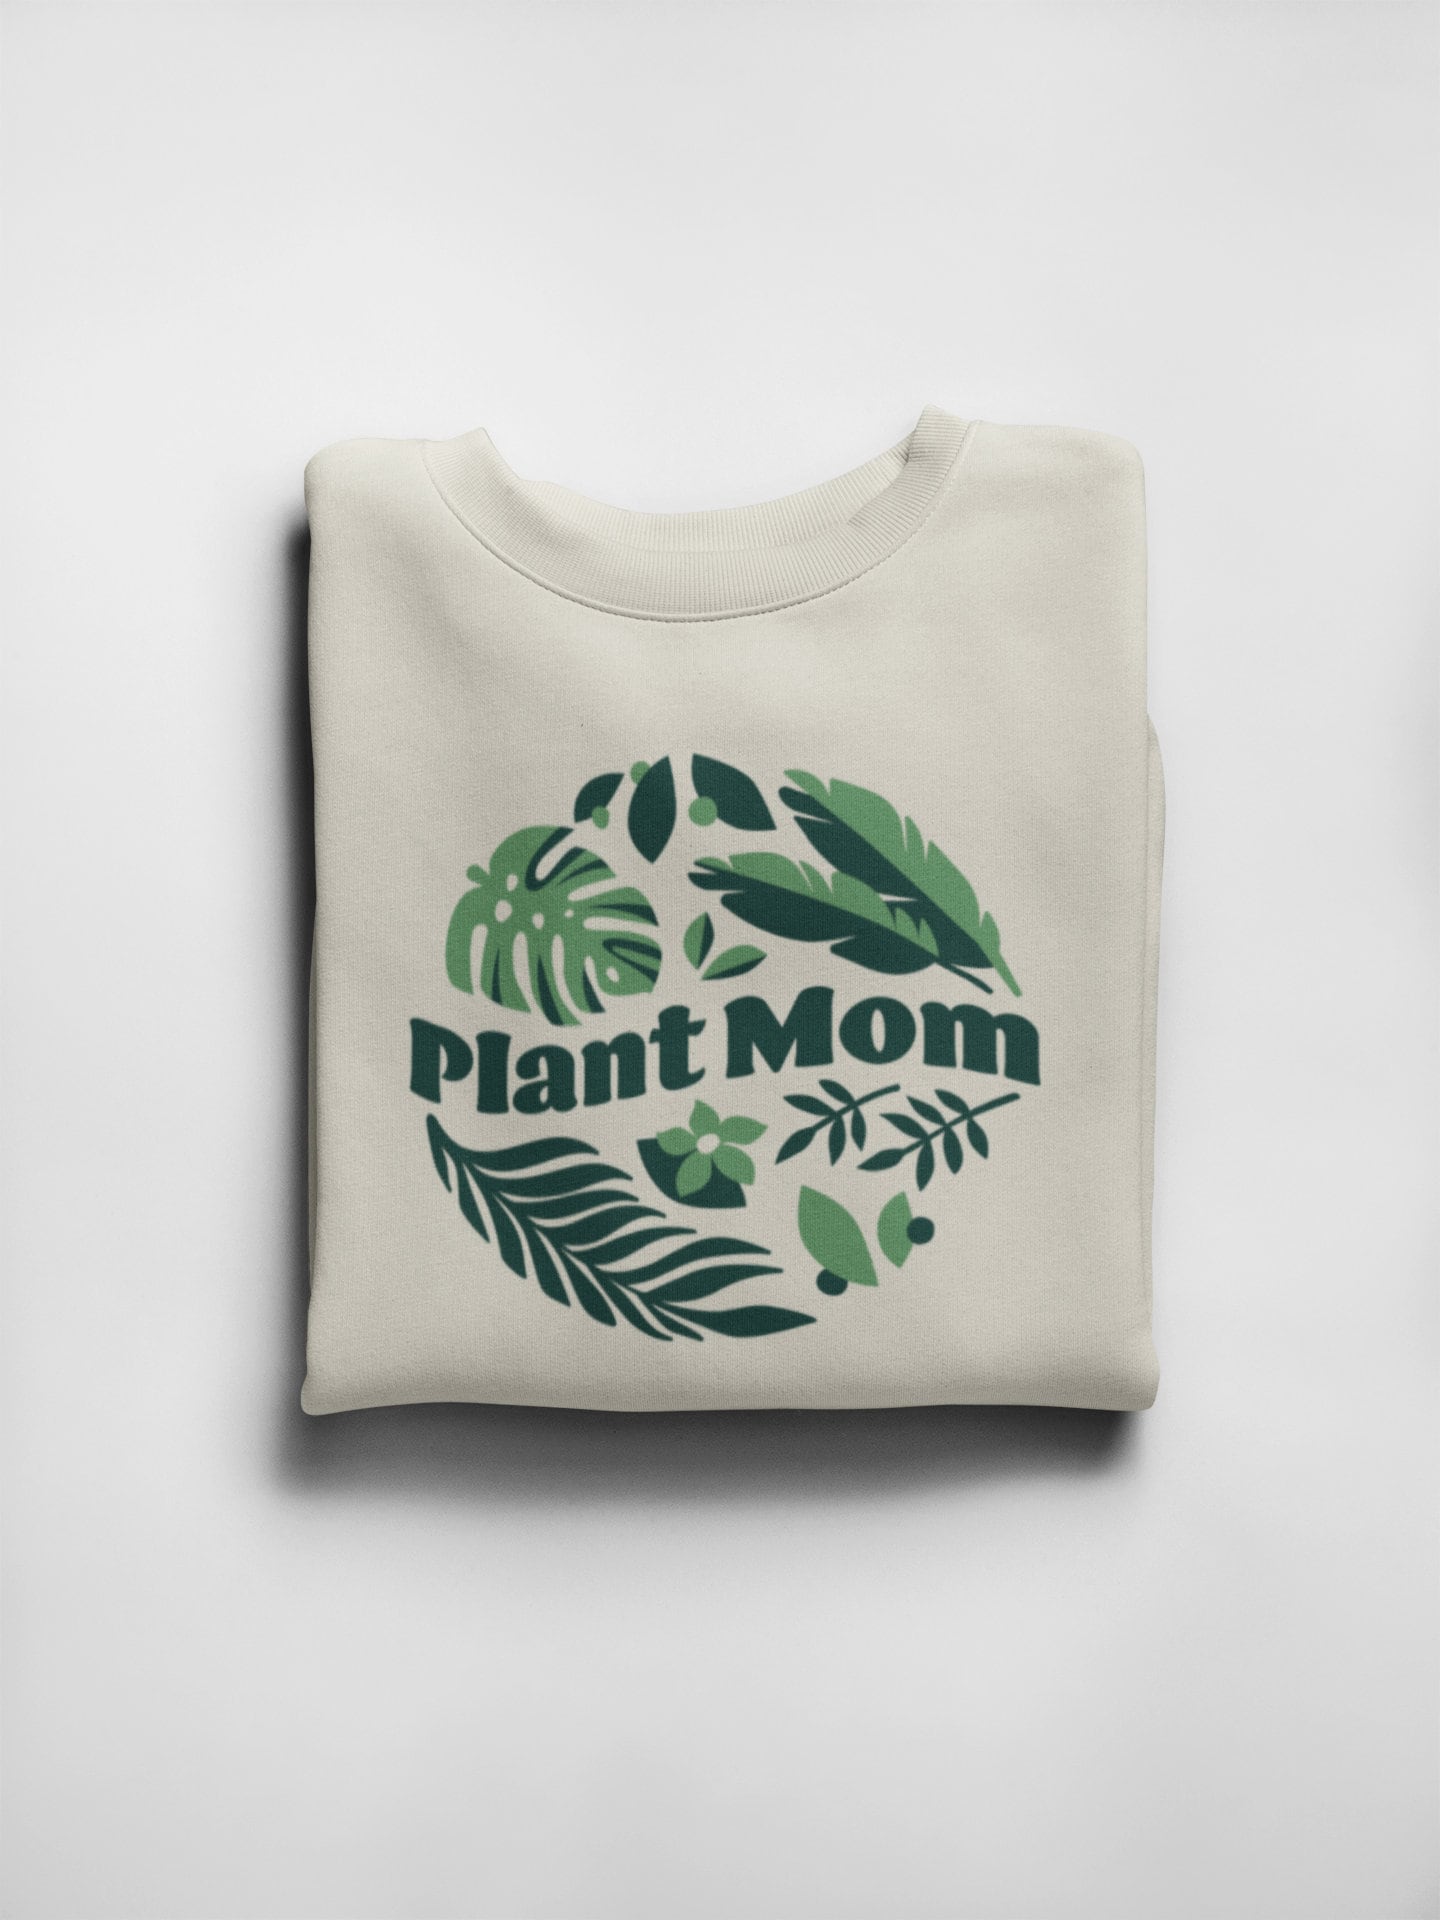 Everyday Shirt for a Self-Confessed Plant Lady